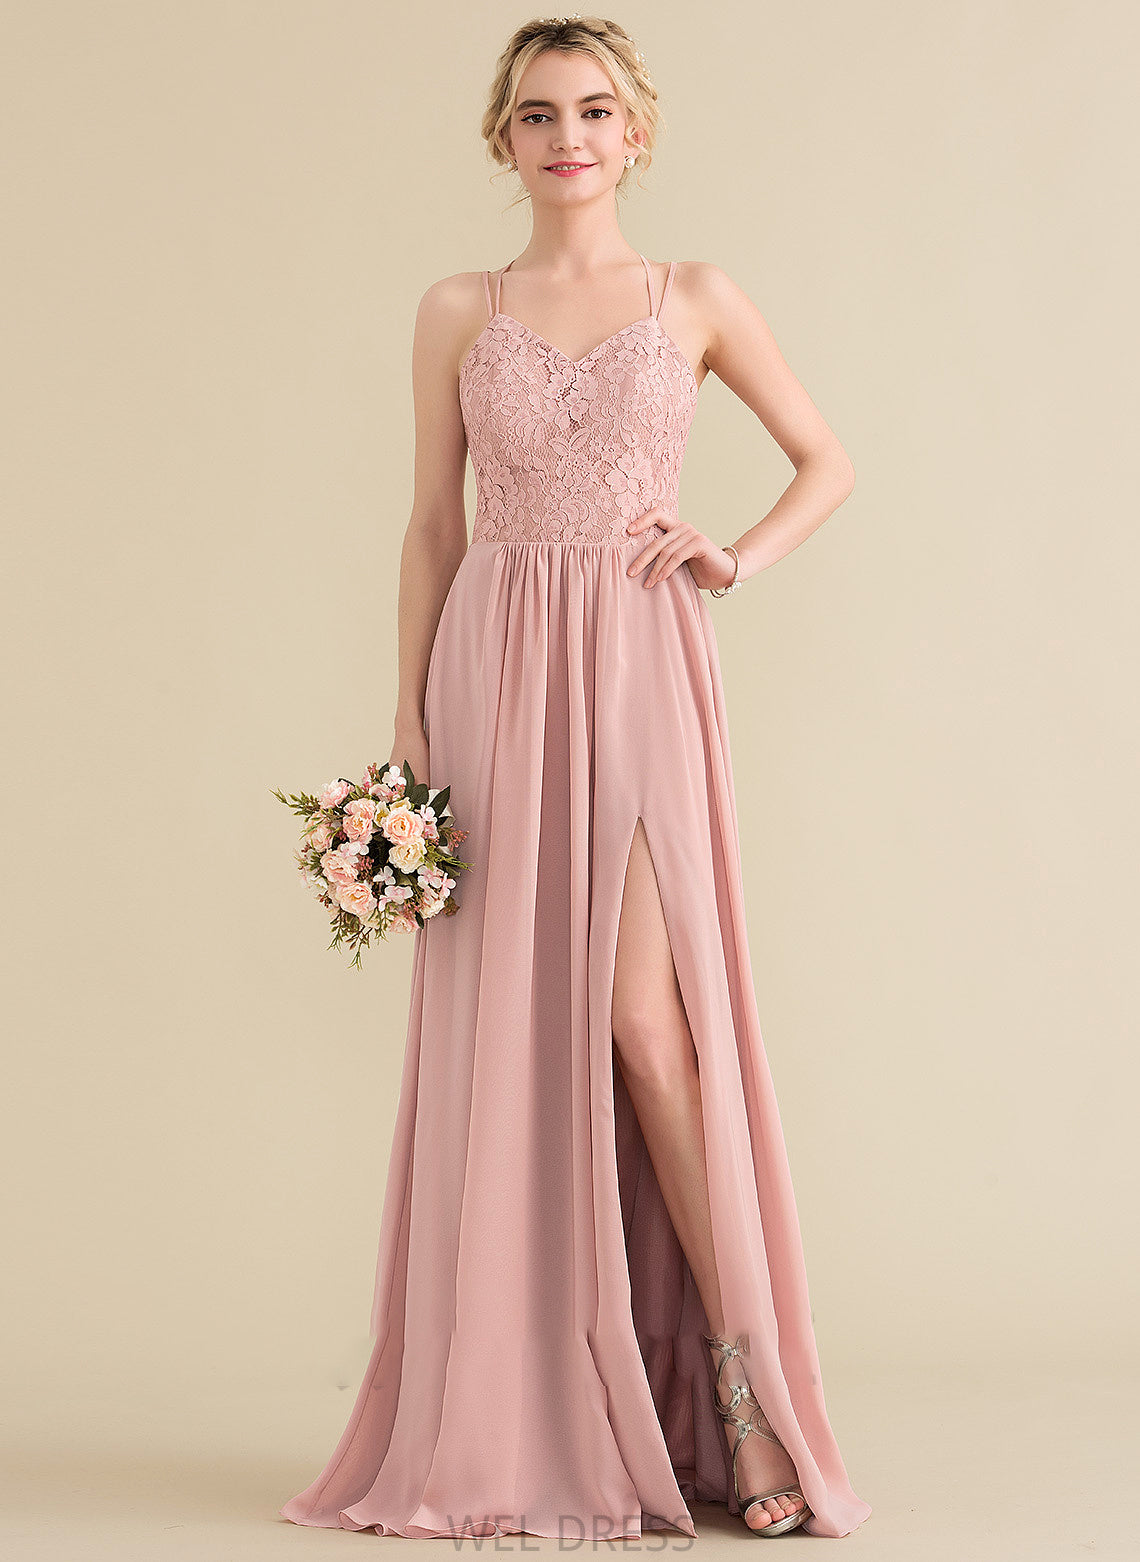 With Front Joselyn Split Prom Dresses Chiffon Floor-Length A-Line Lace Sweetheart